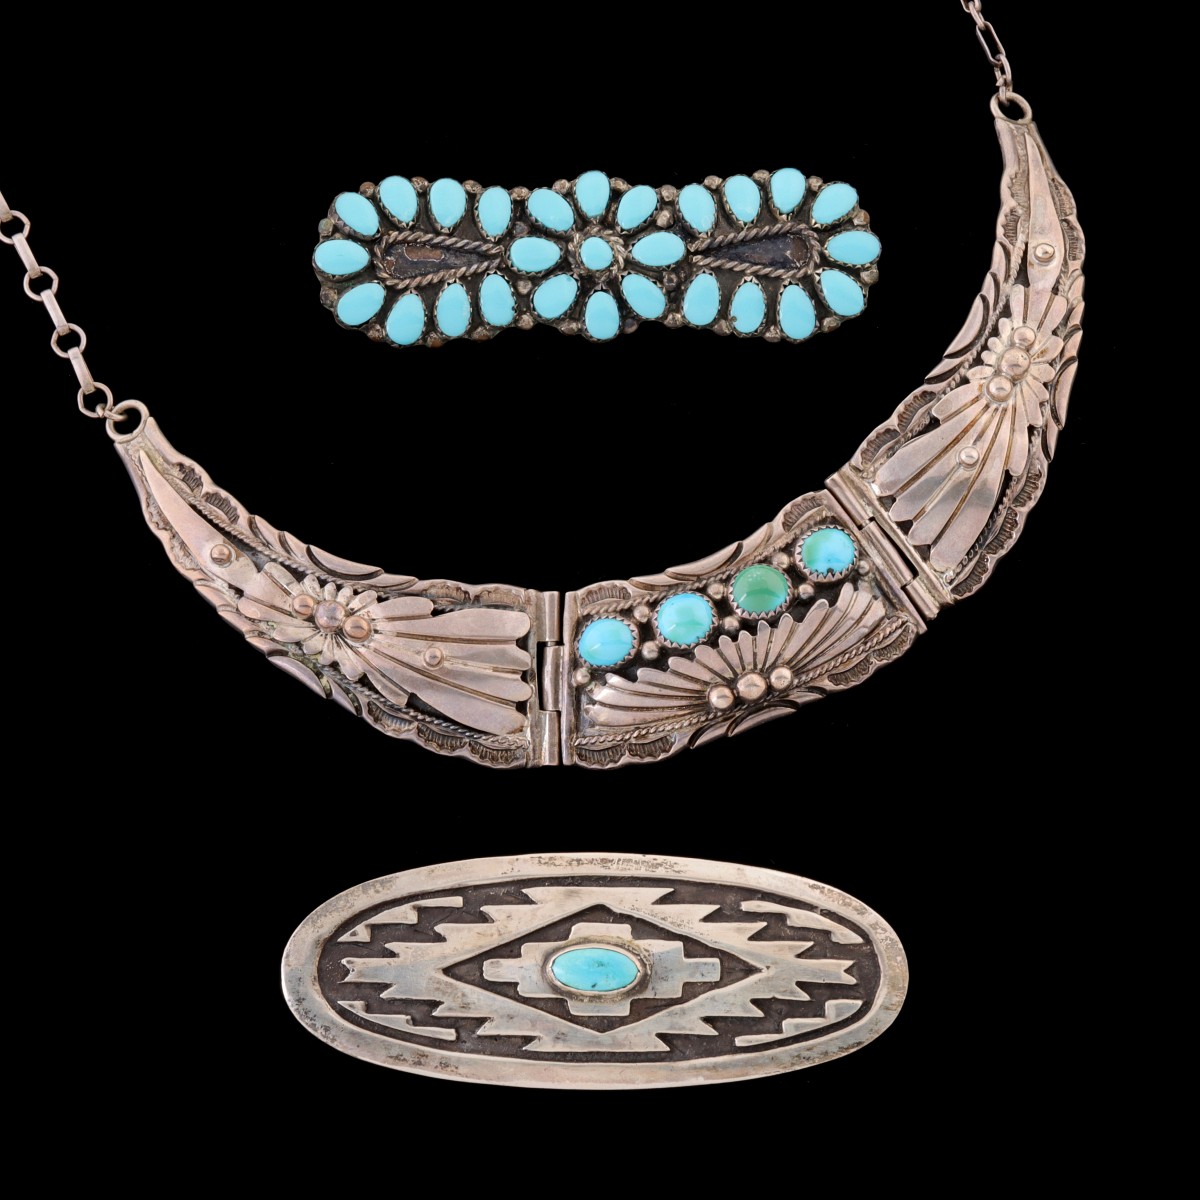 ARTISAN-SIGNED COLLAR-STYLE CHOKER AND BROOCHES